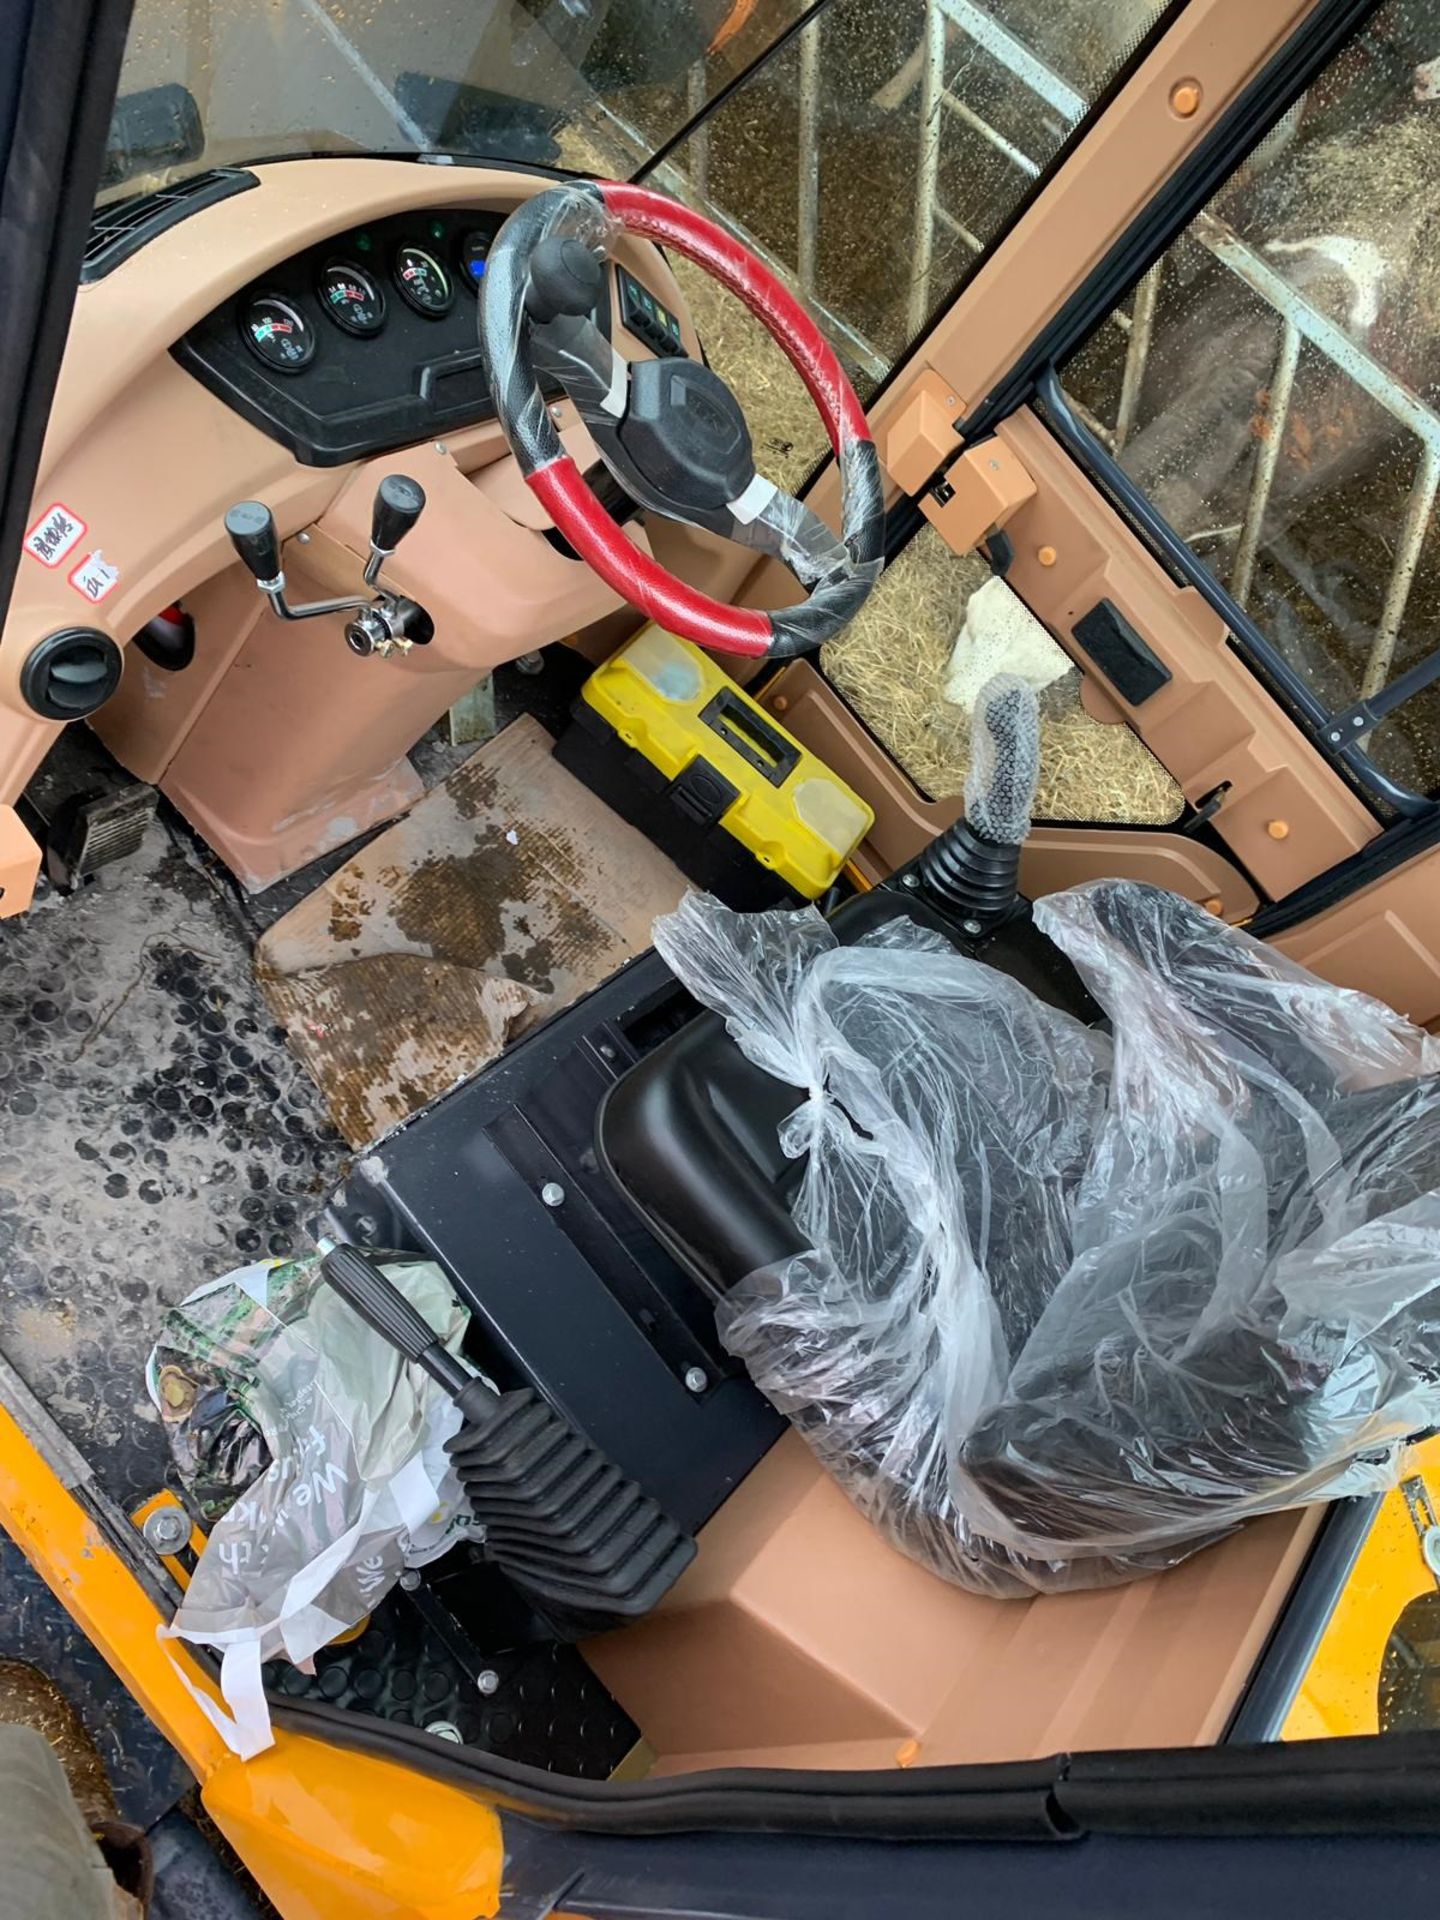 2019 BRAND NEW AND UNUSED ATTACK ZL15 WHEEL LOADER, RUNS WORKS AND LIFTS *PLUS VAT* - Image 11 of 13